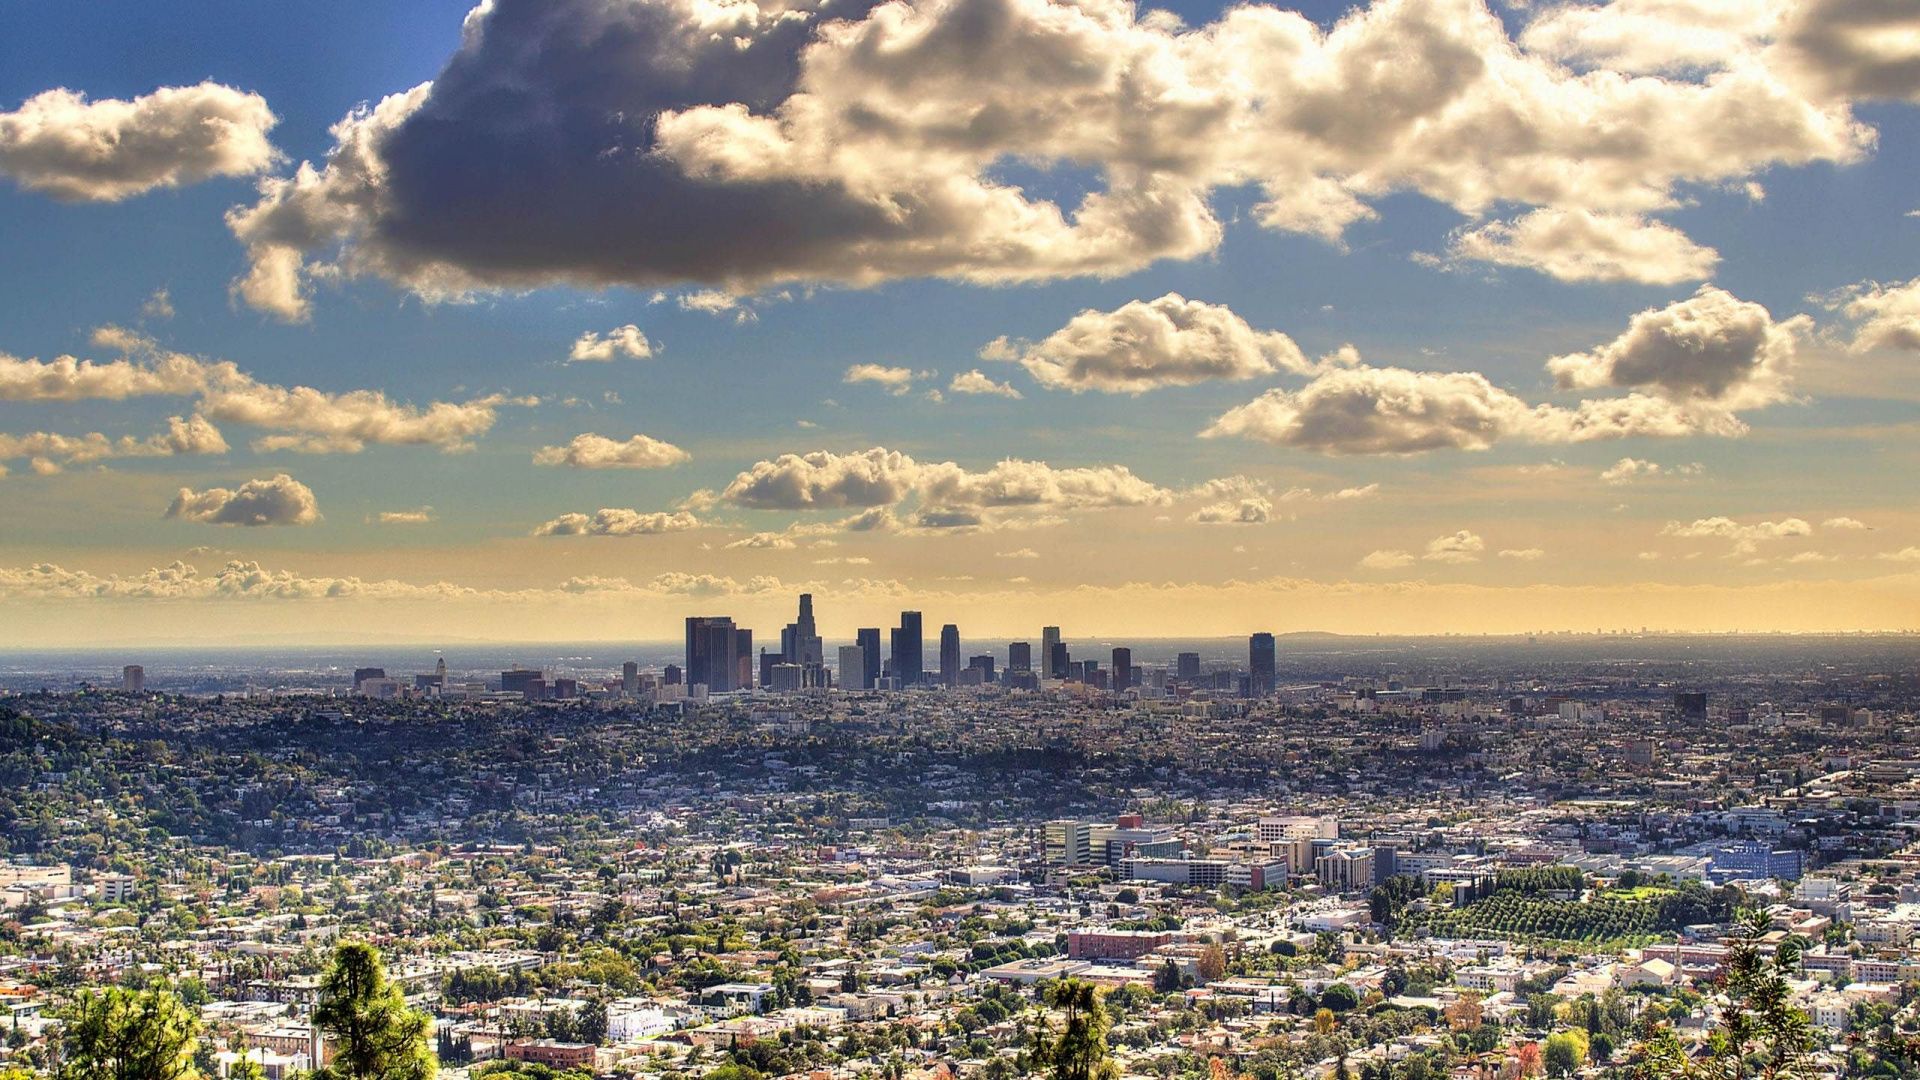 Los Angeles wallpaper for laptop